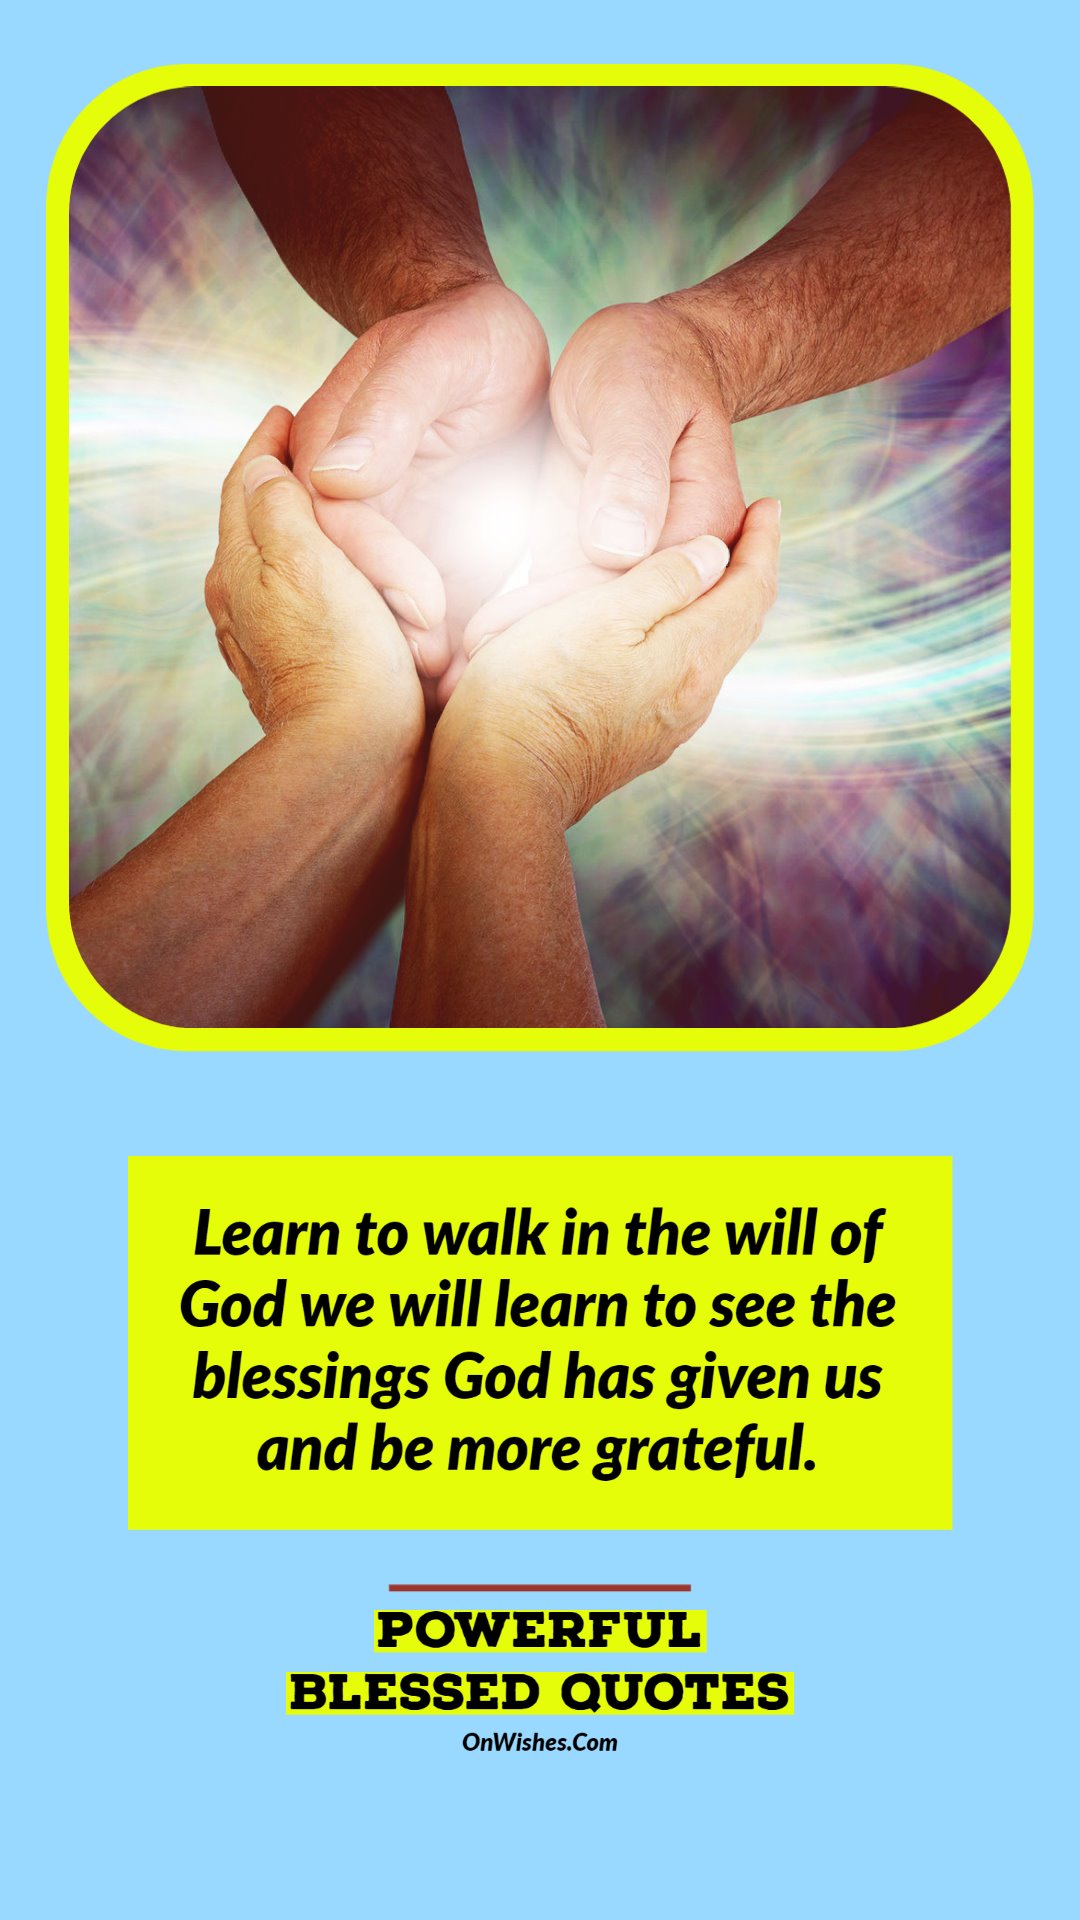 powerful blessed quotes to help you count your blessings